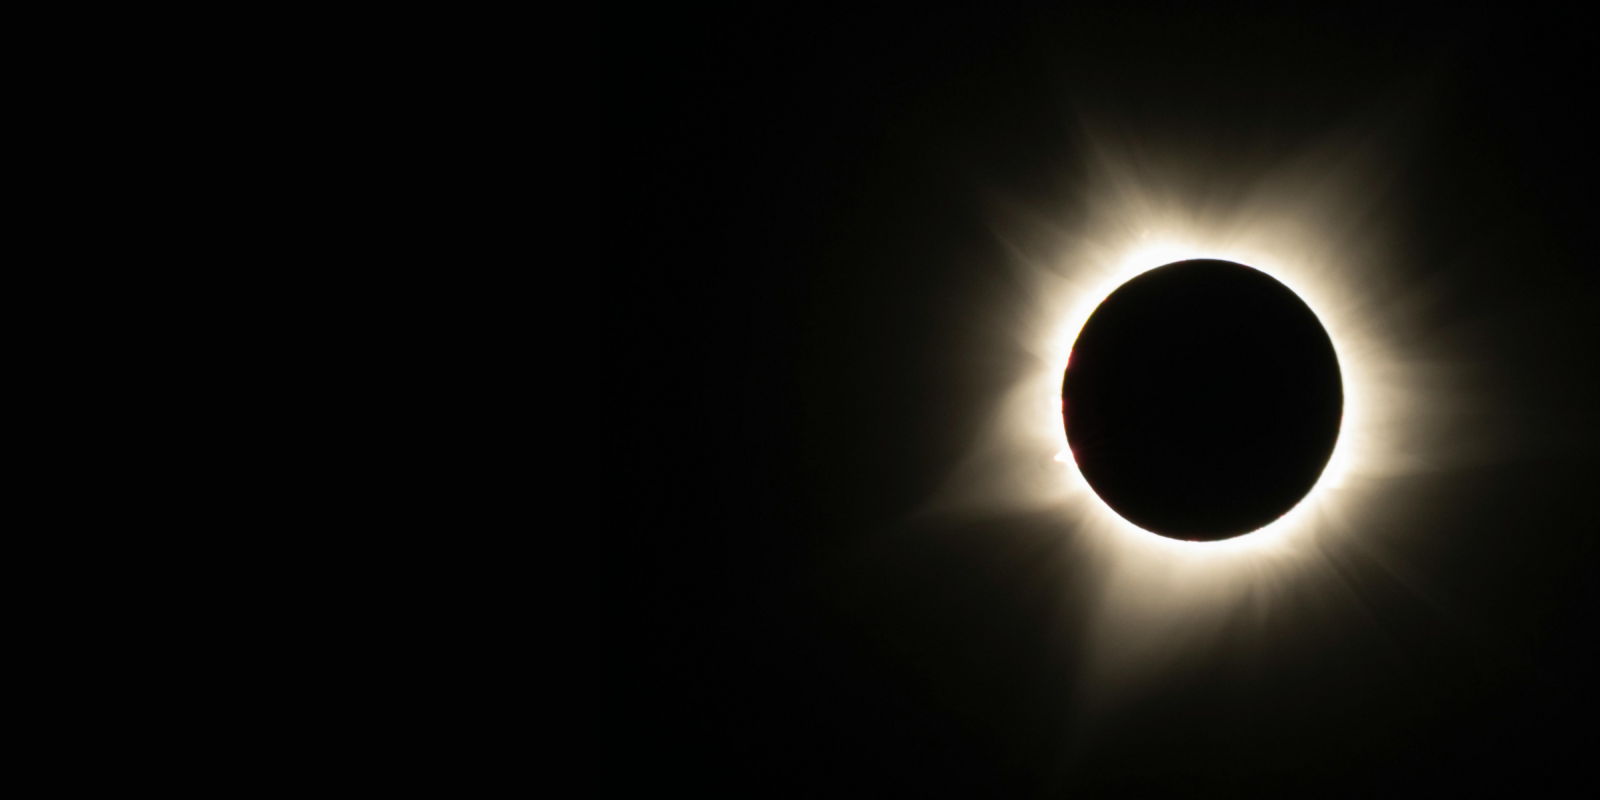 An image of a solar eclipse